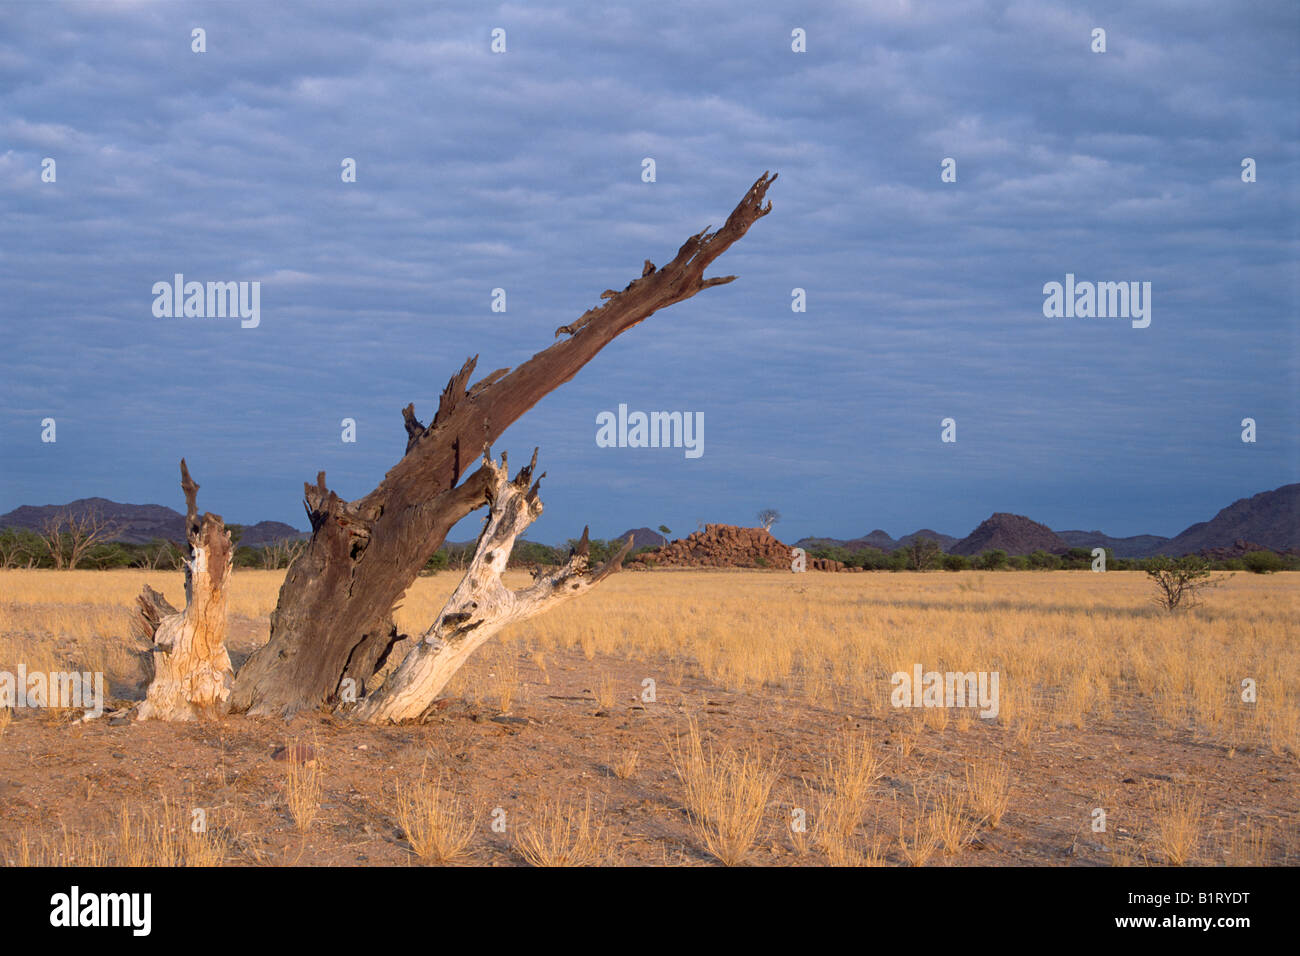 Dead tree in Damaraland, Namibia, Africa Stock Photo